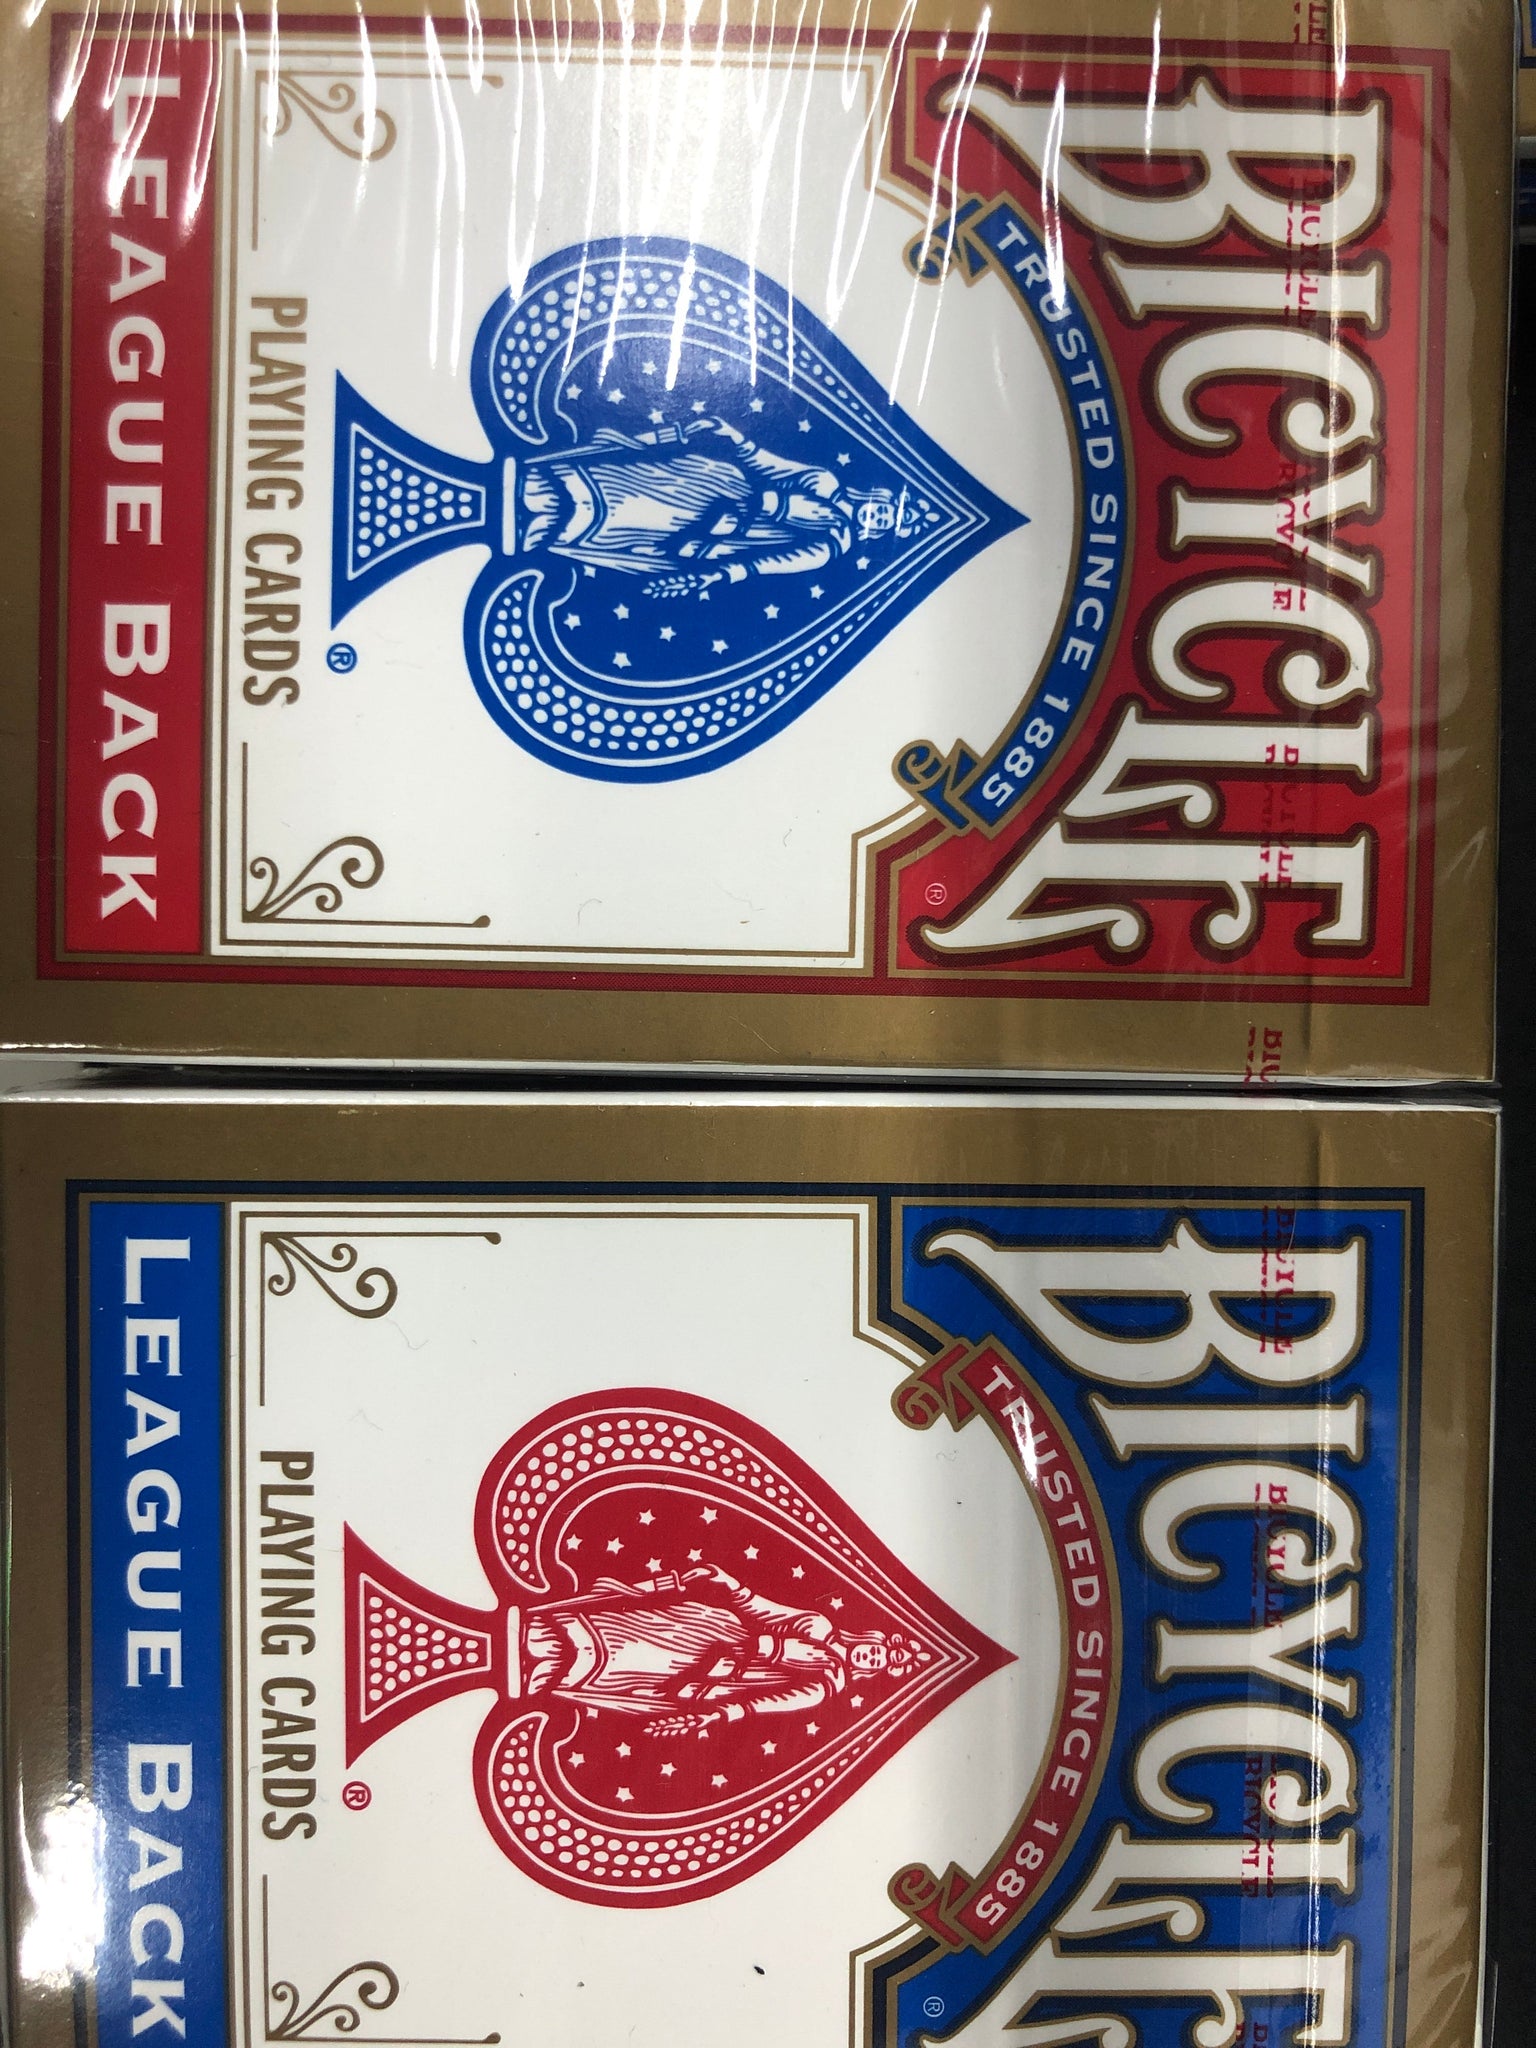 BICYCLE CARDS